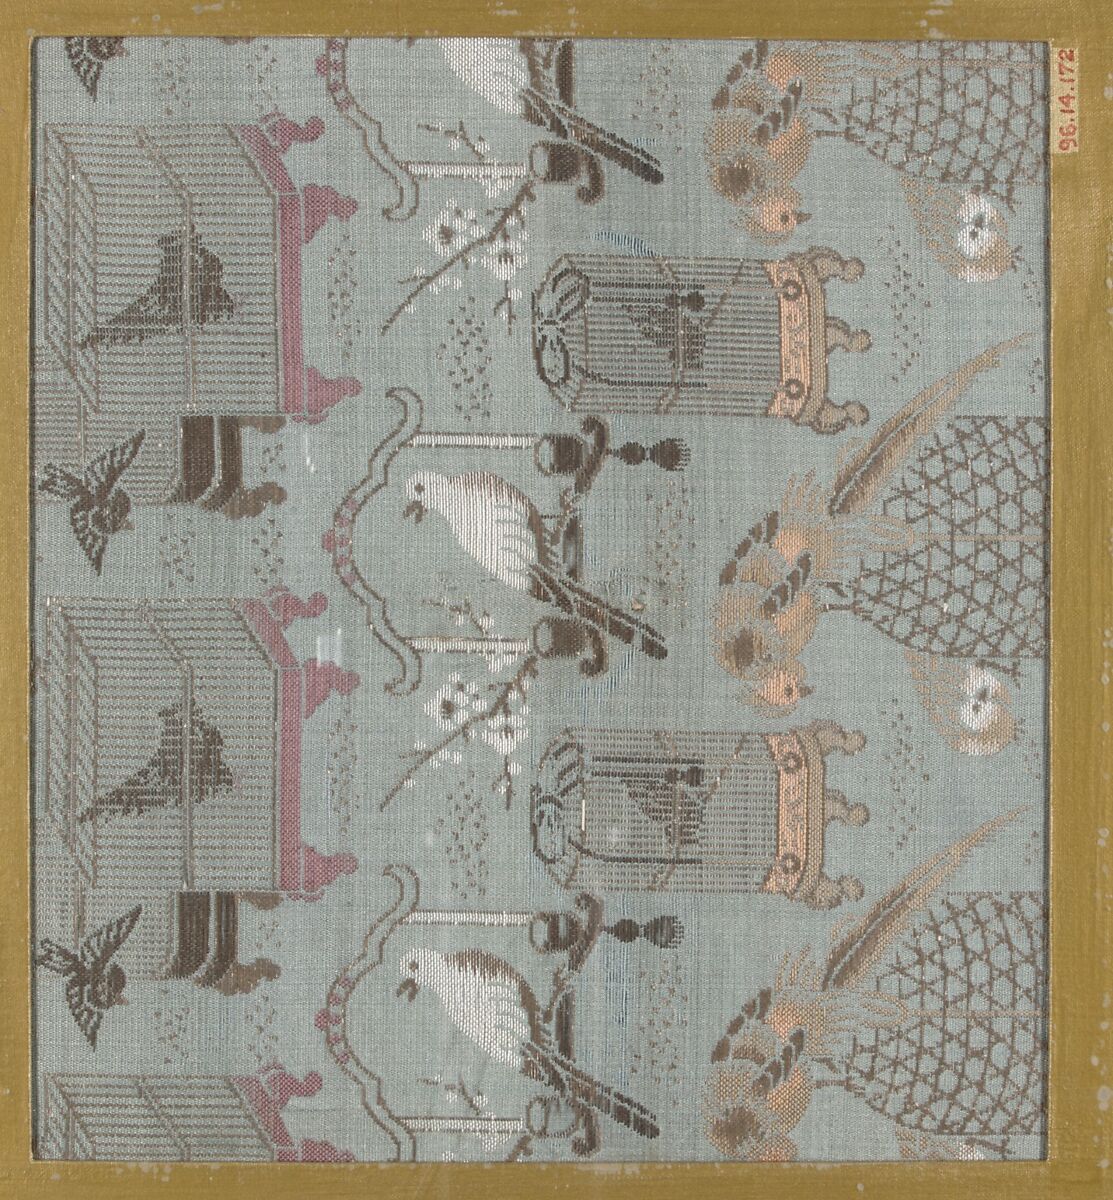 Textile fragment with incomplete repeating pattern of birds and bird cages, Silk, Japan 